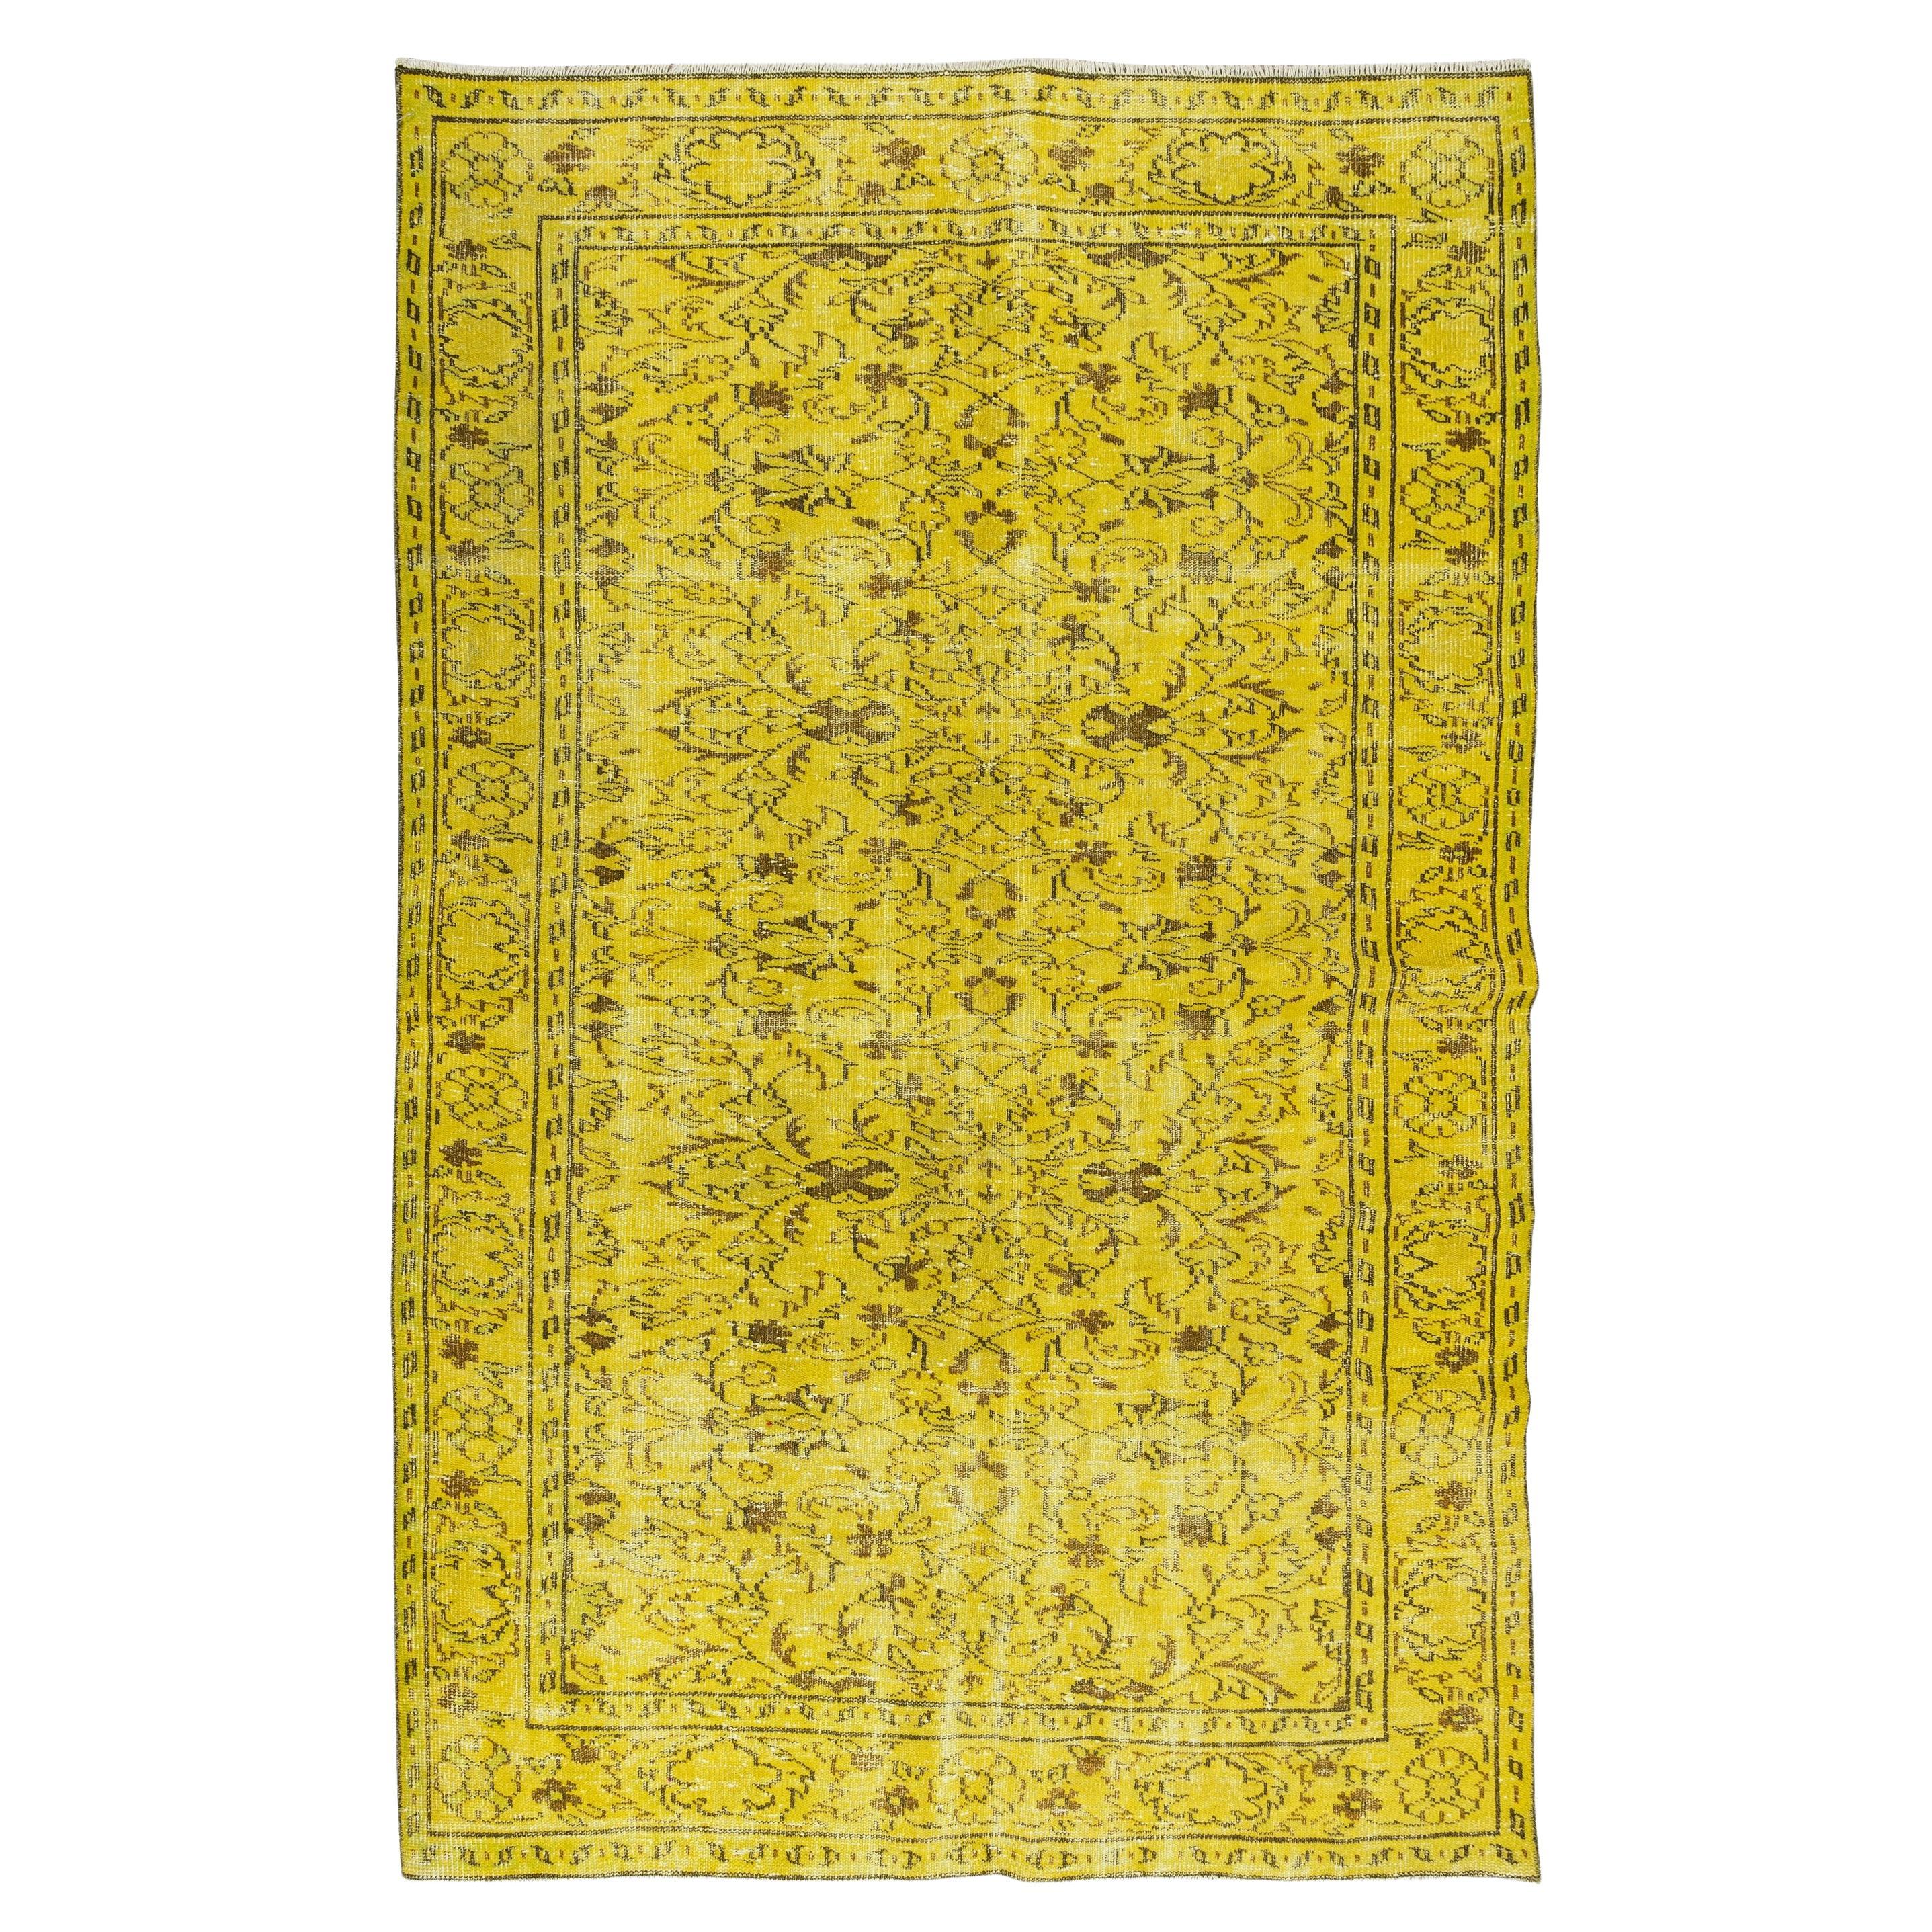 5.6x9 Ft Floral Pattern Yellow Over-Dyed Rug, 1960s Turkish Handmade Wool Carpet For Sale